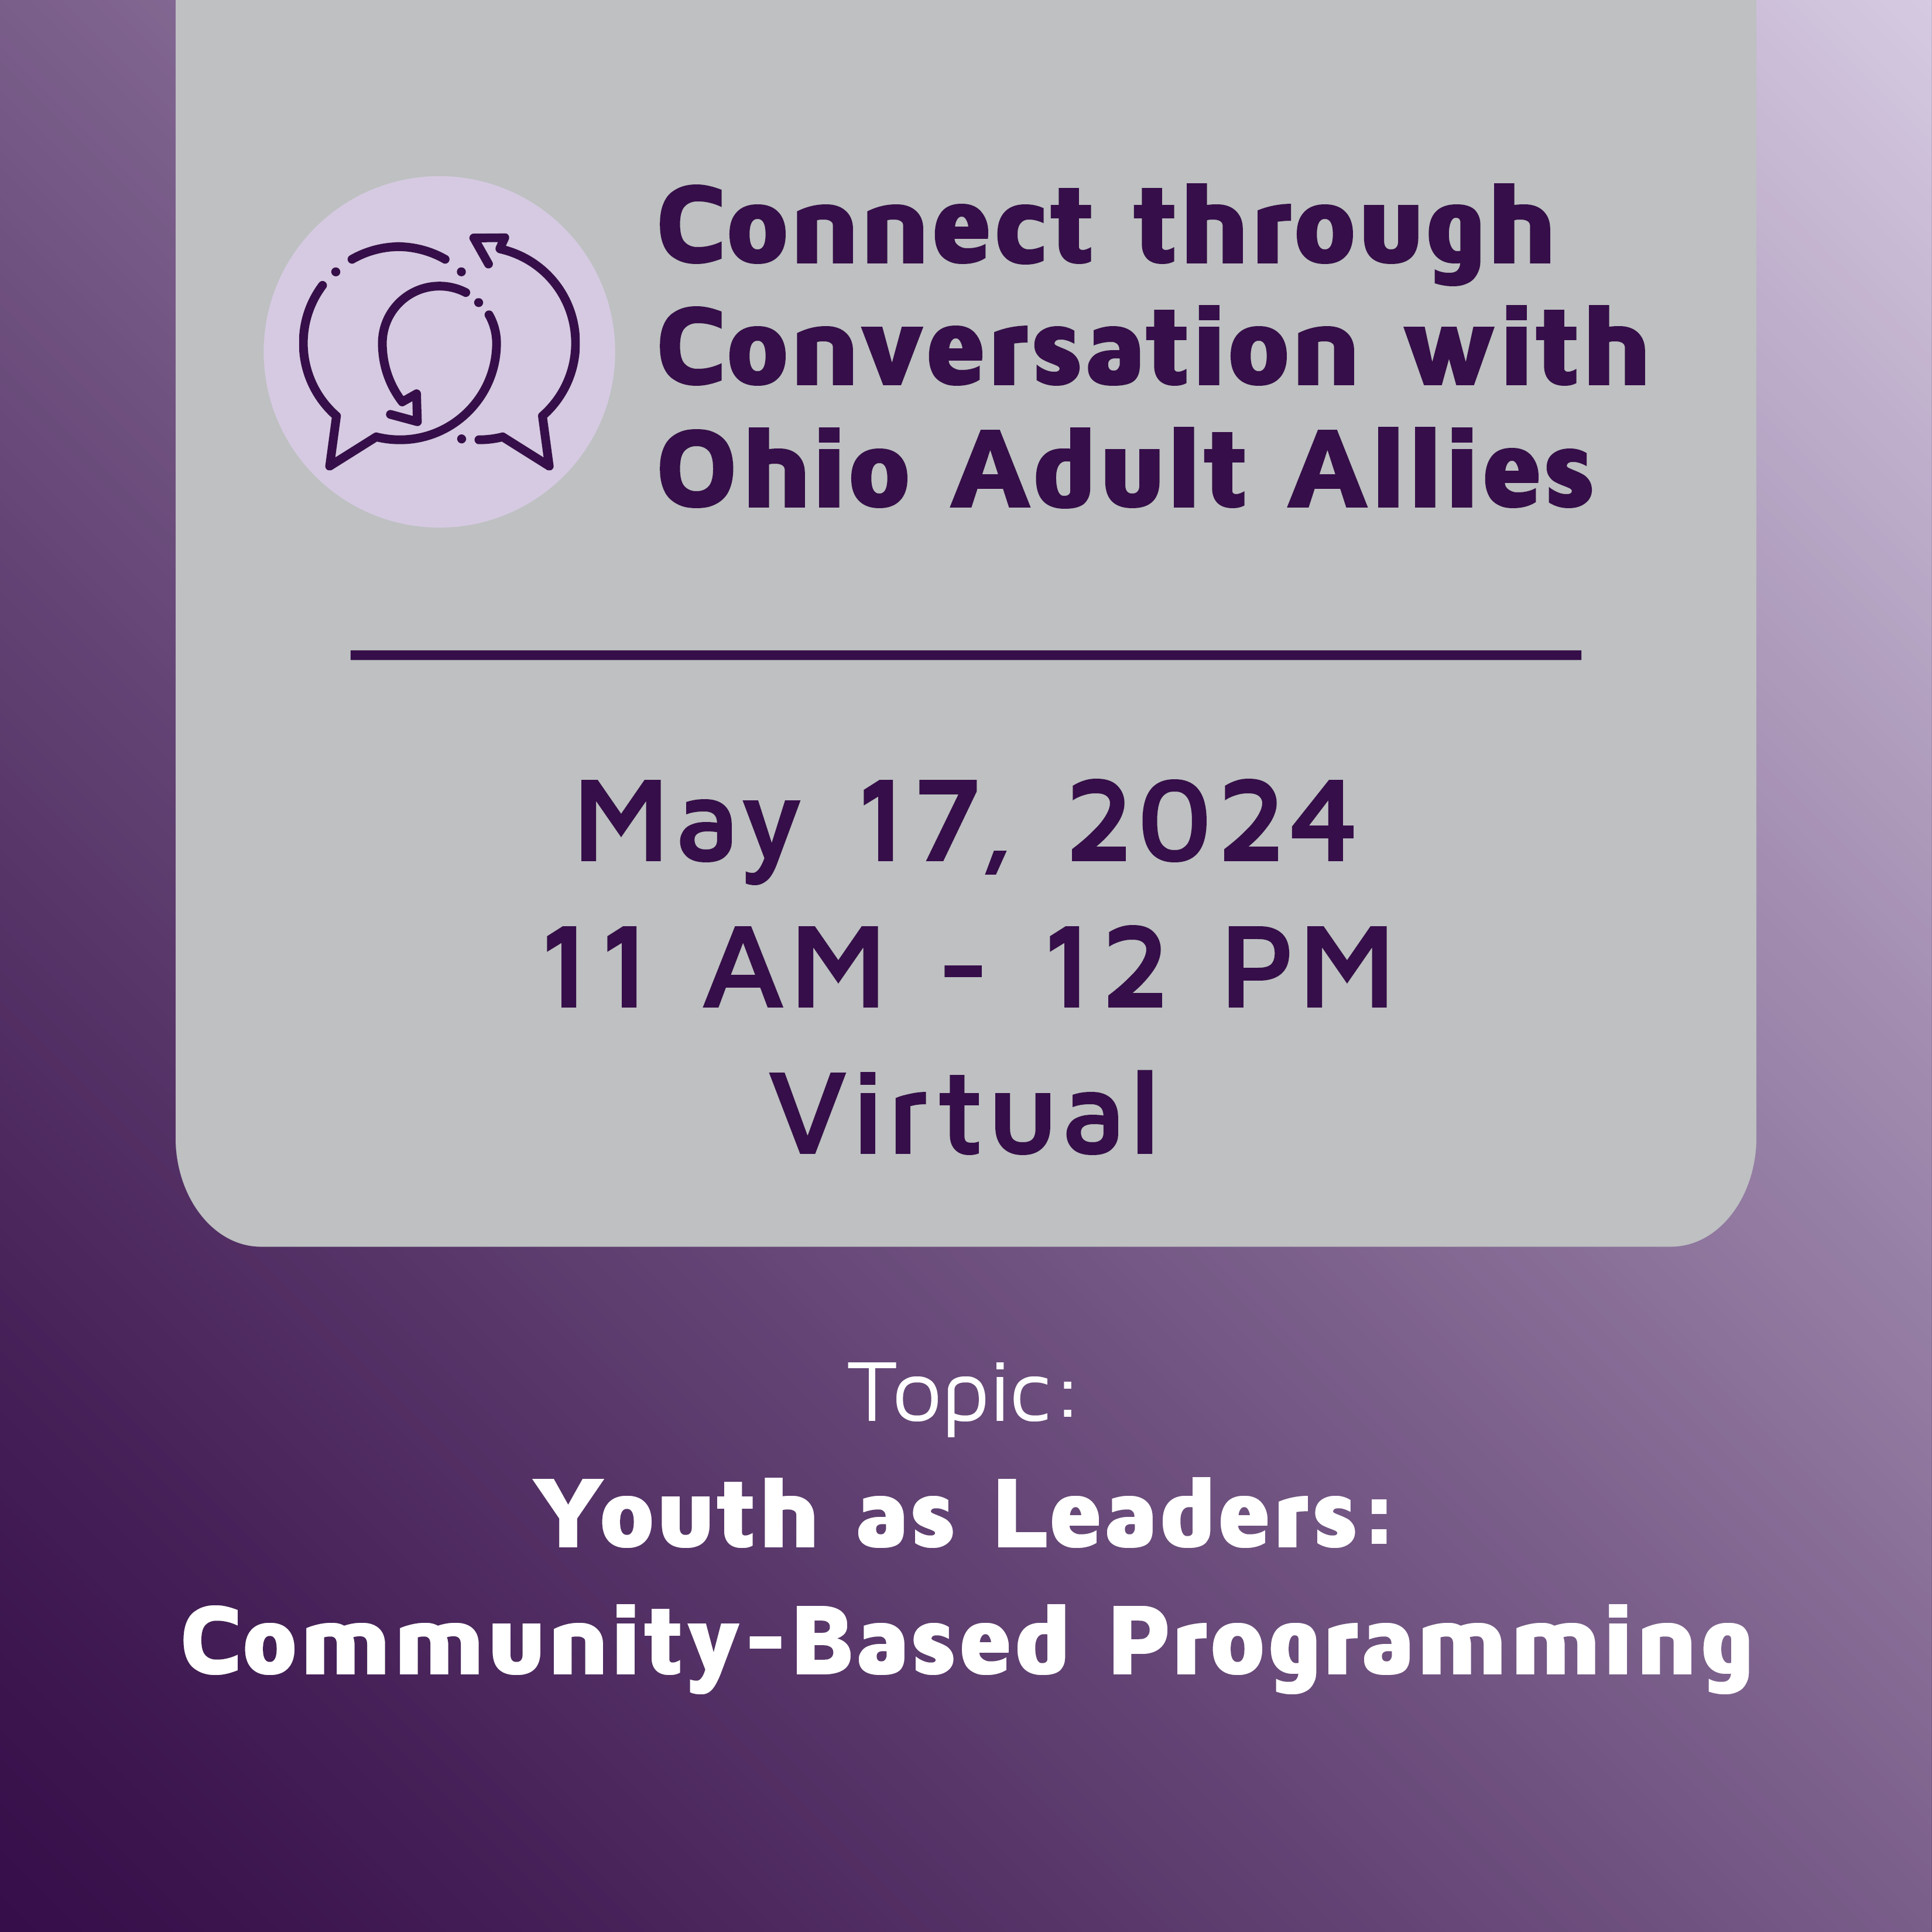 Connect through Conversation with Ohio Adult Allies